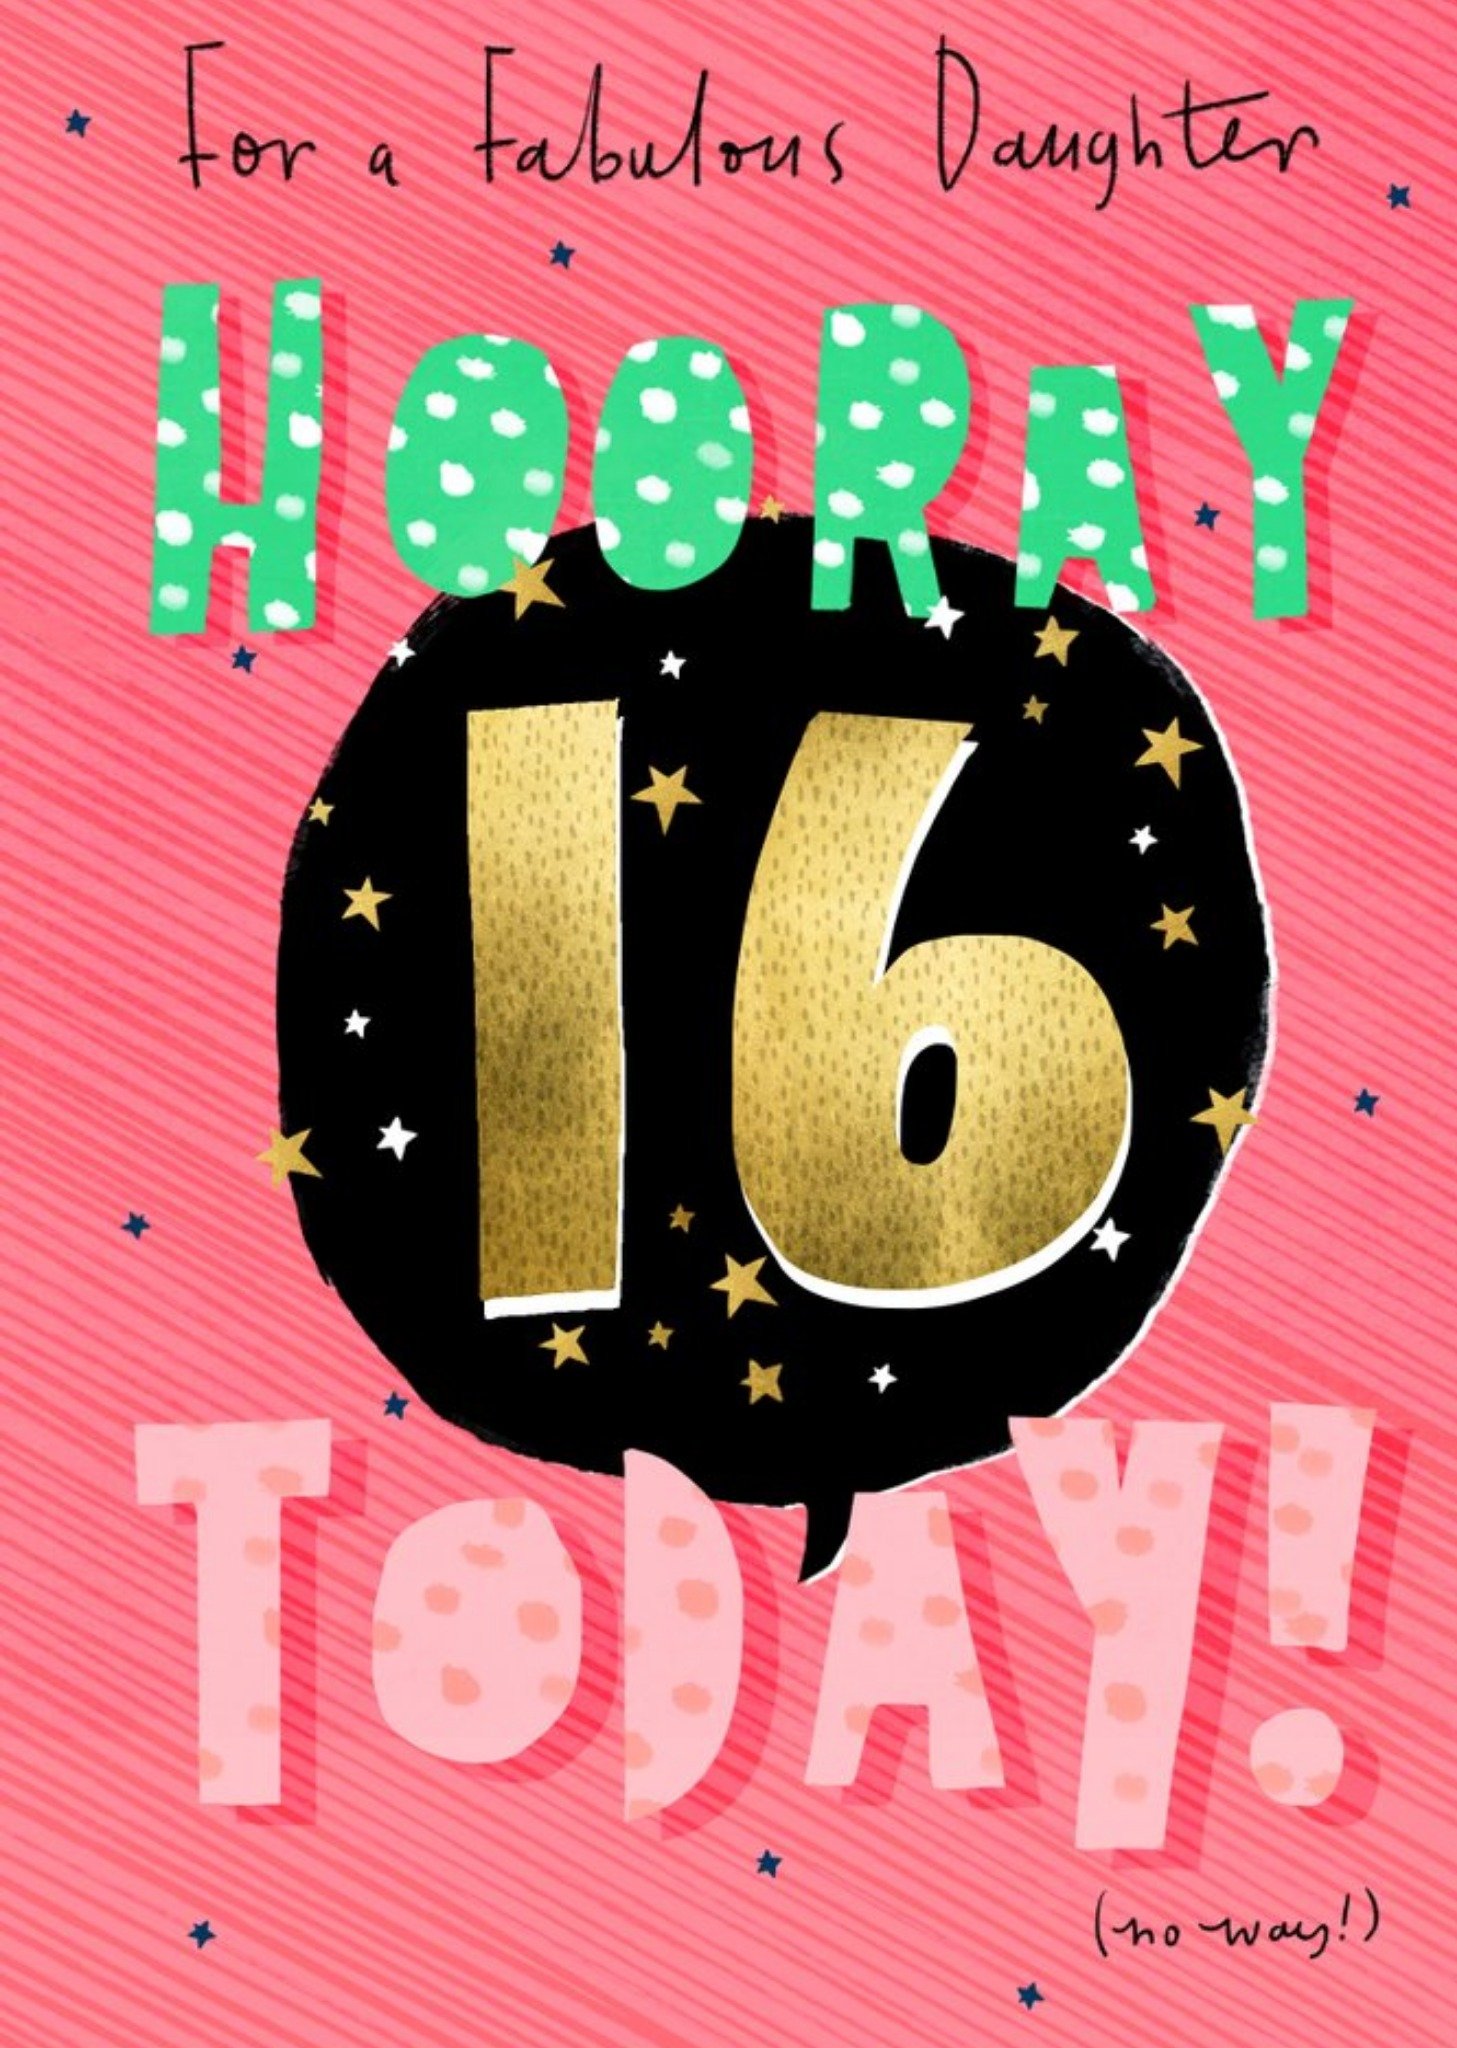 Moonpig Cute Illustration Typographic For A Fabulous Daghter Hooray 16 Today Birthday Card Ecard